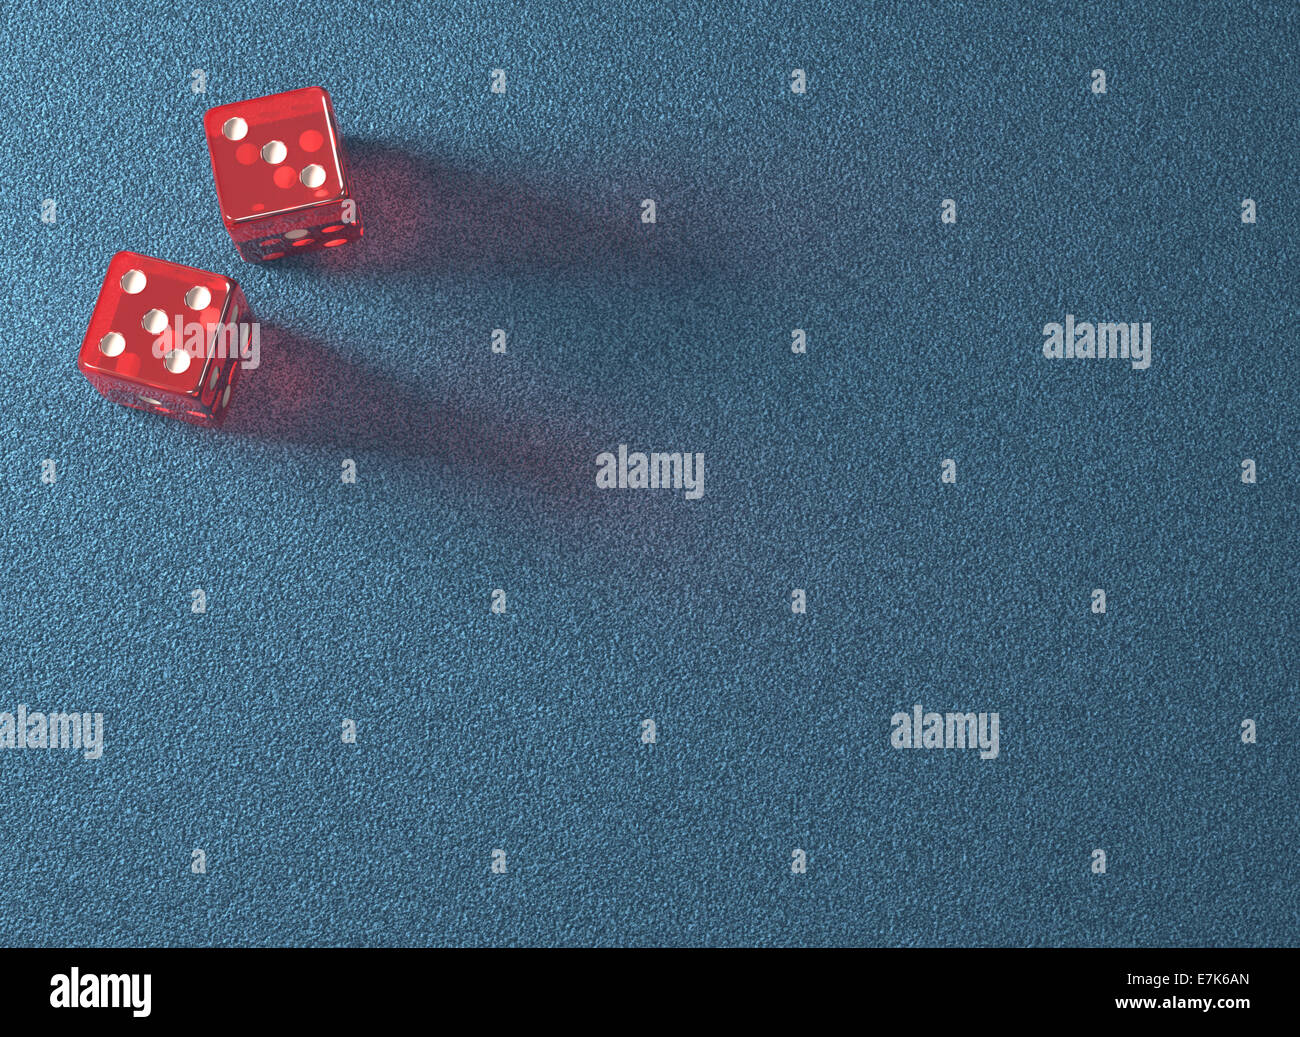 Red dice on blue table. Your text on the empty space. Clipping path included. Stock Photo